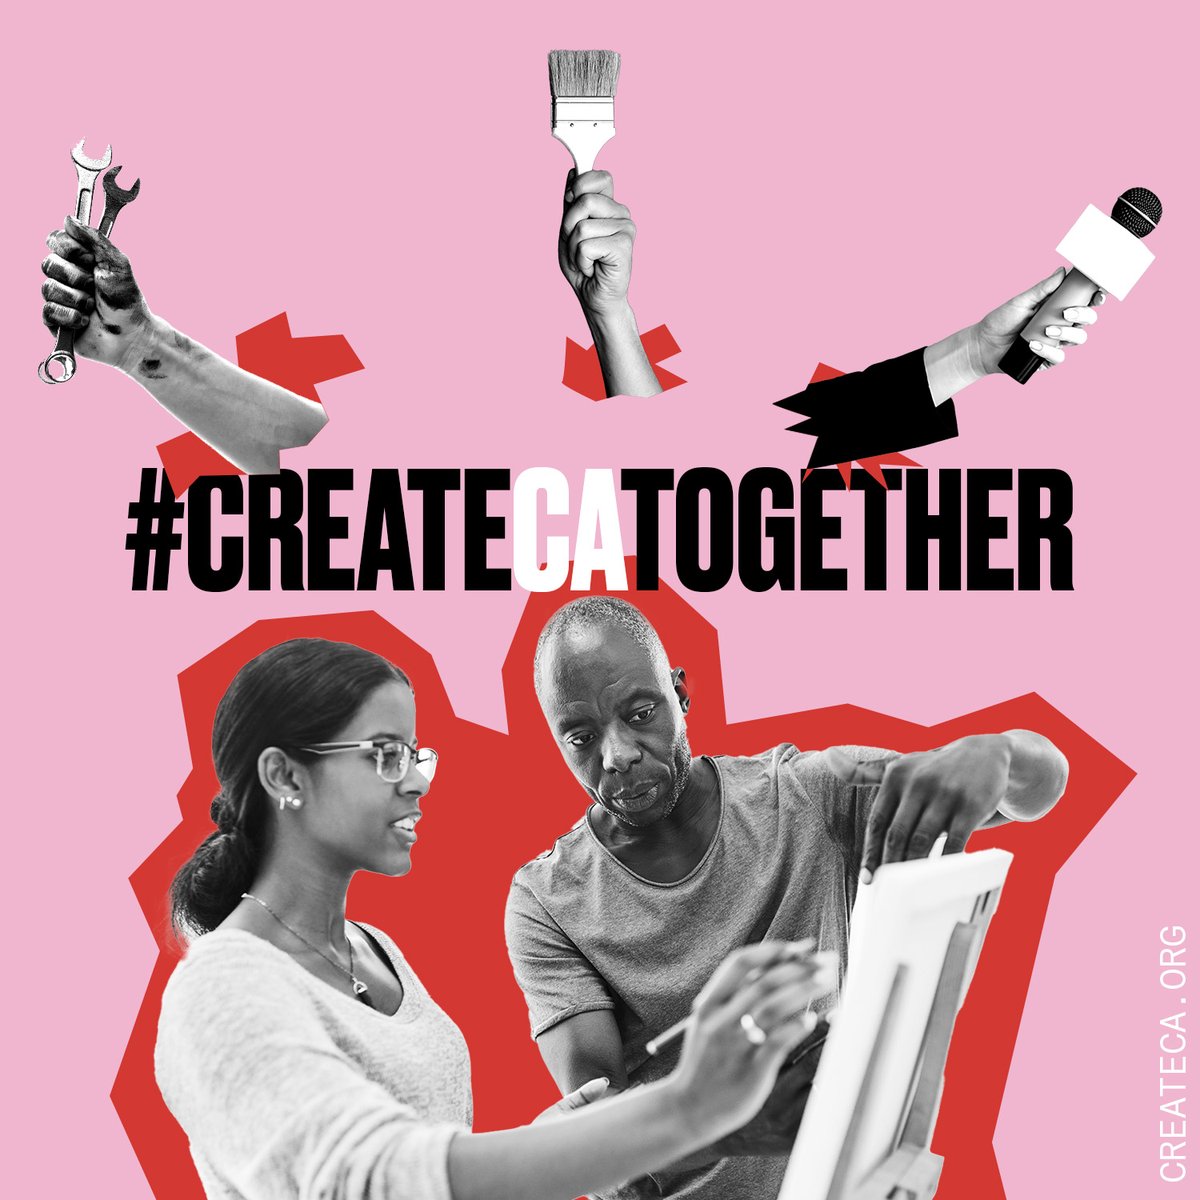 CaliforniaPTA: Arts education teachers change lives. No matter a student’s future career, the benefits of a quality arts education lead to successful careers across all fields. Tag an arts educator here who changed your life! #CreateCATogether #PTA4Kids …